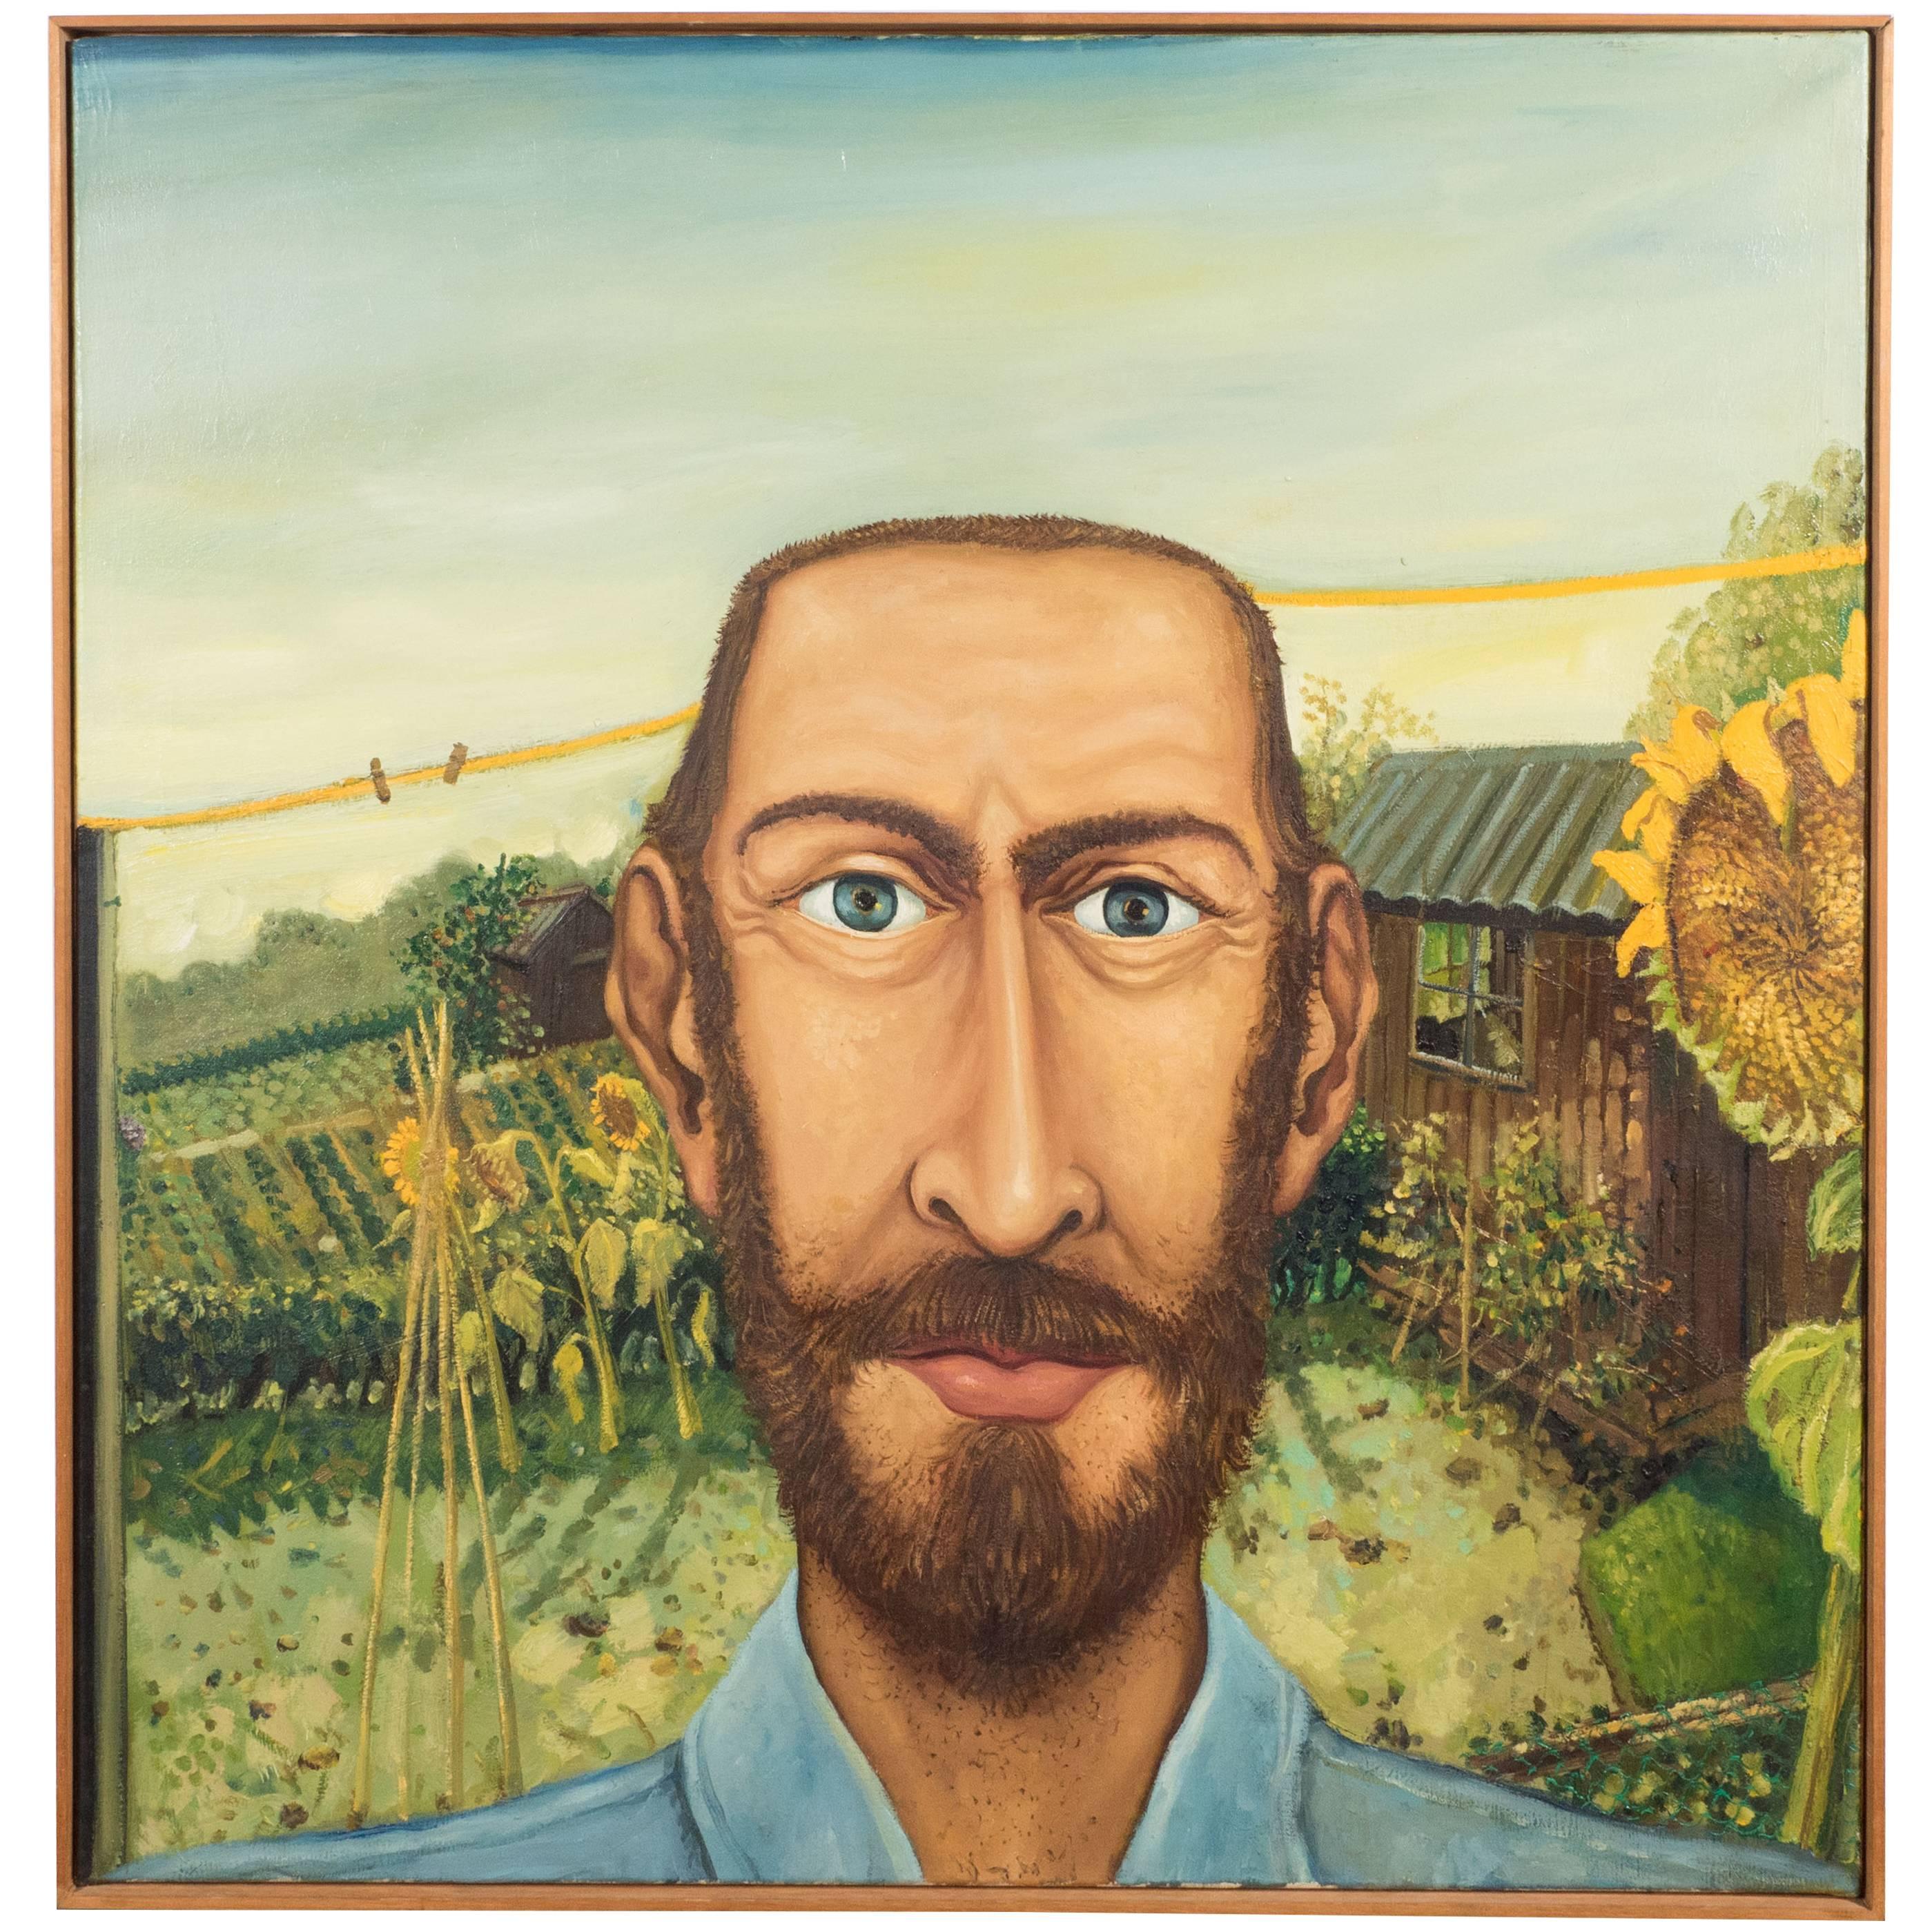 The Sun Flower Portrait English Anthony Green, Oil on Canvas, Realized in 1974